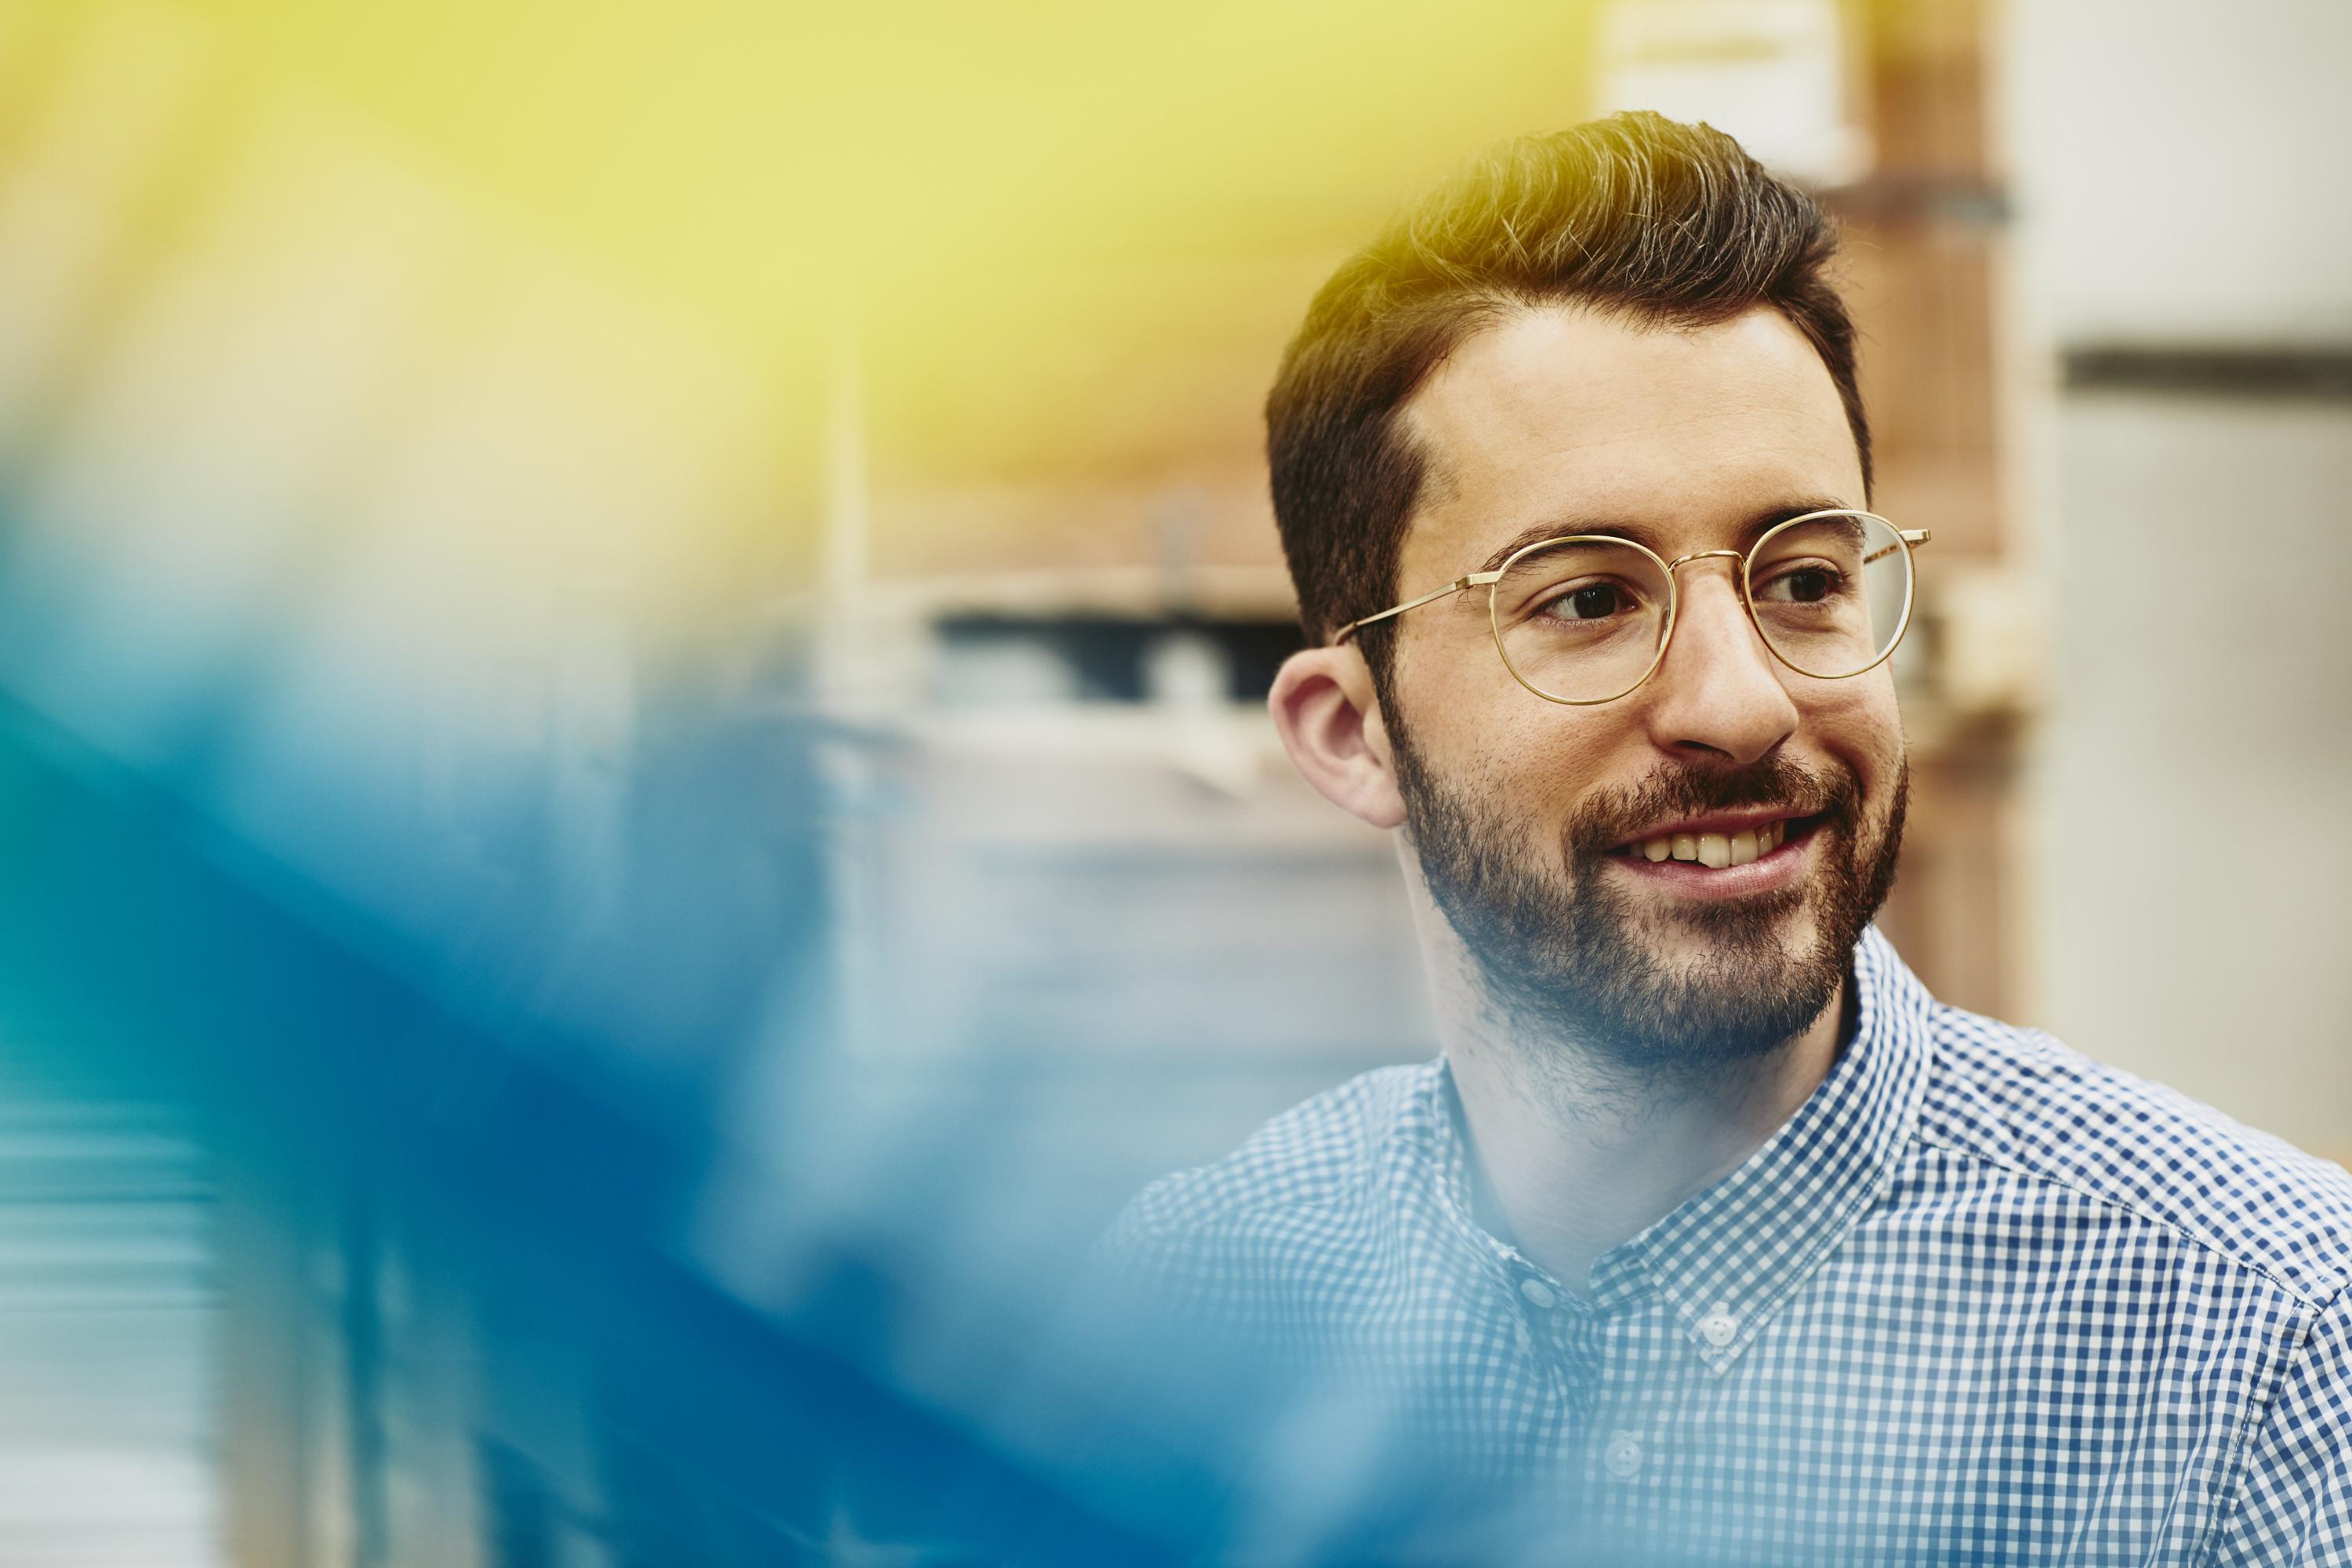 Male caucasian worker in logistics environment. Wearing glasses. Checkered shirt. Groomed beard and moustache. Primary color blue. Secondary color yellow.